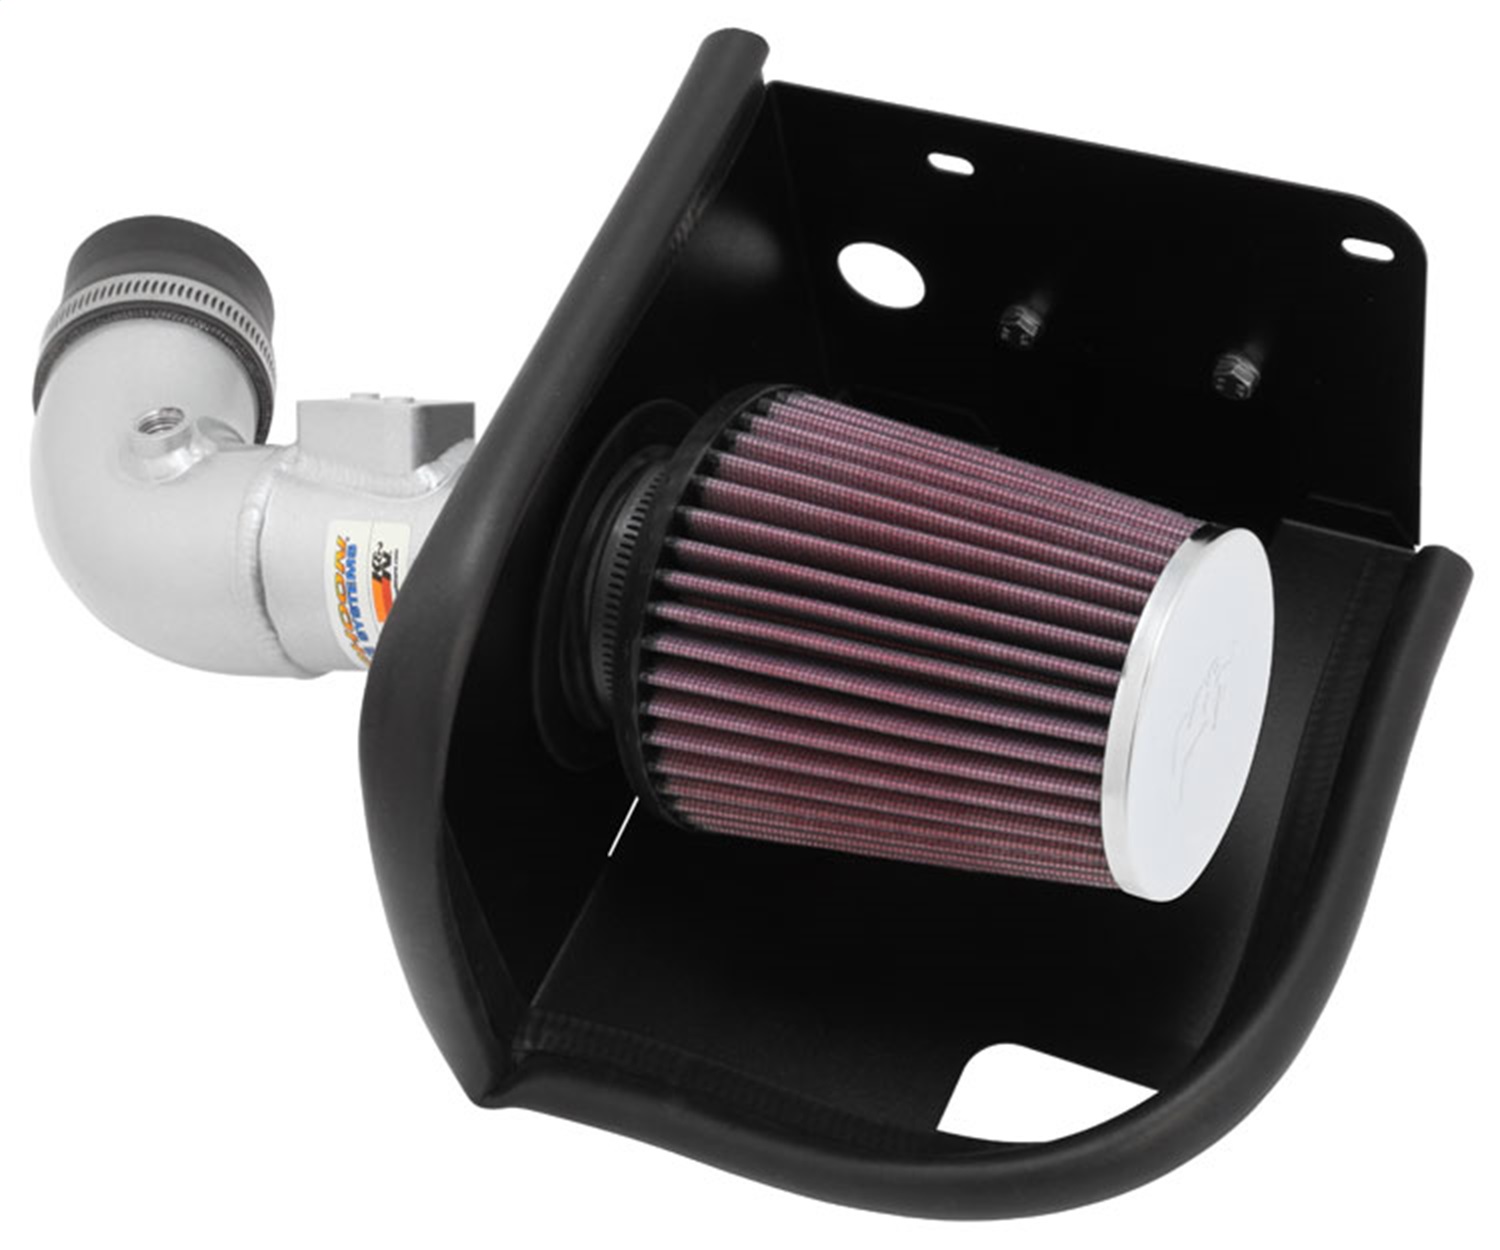 K&N Filters K&N Filters 69-3530TS Typhoon; Cold Air Intake Filter Assembly Fits 11-13 Fiesta